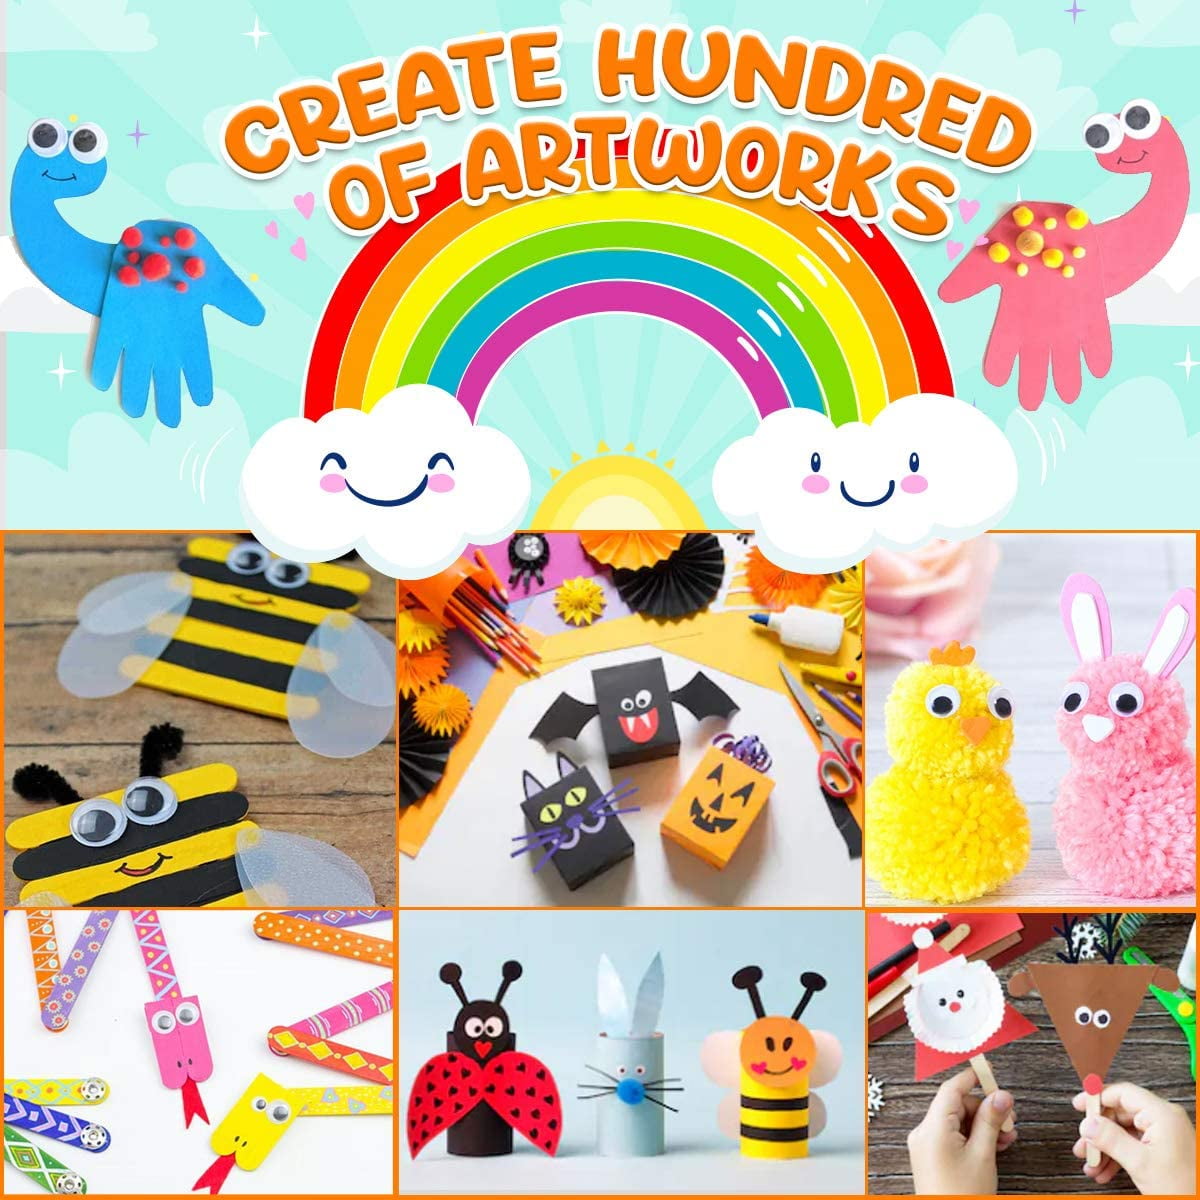 10 Arts & Crafts Gift Ideas for Kids under 10 Dollars - 2paws Designs